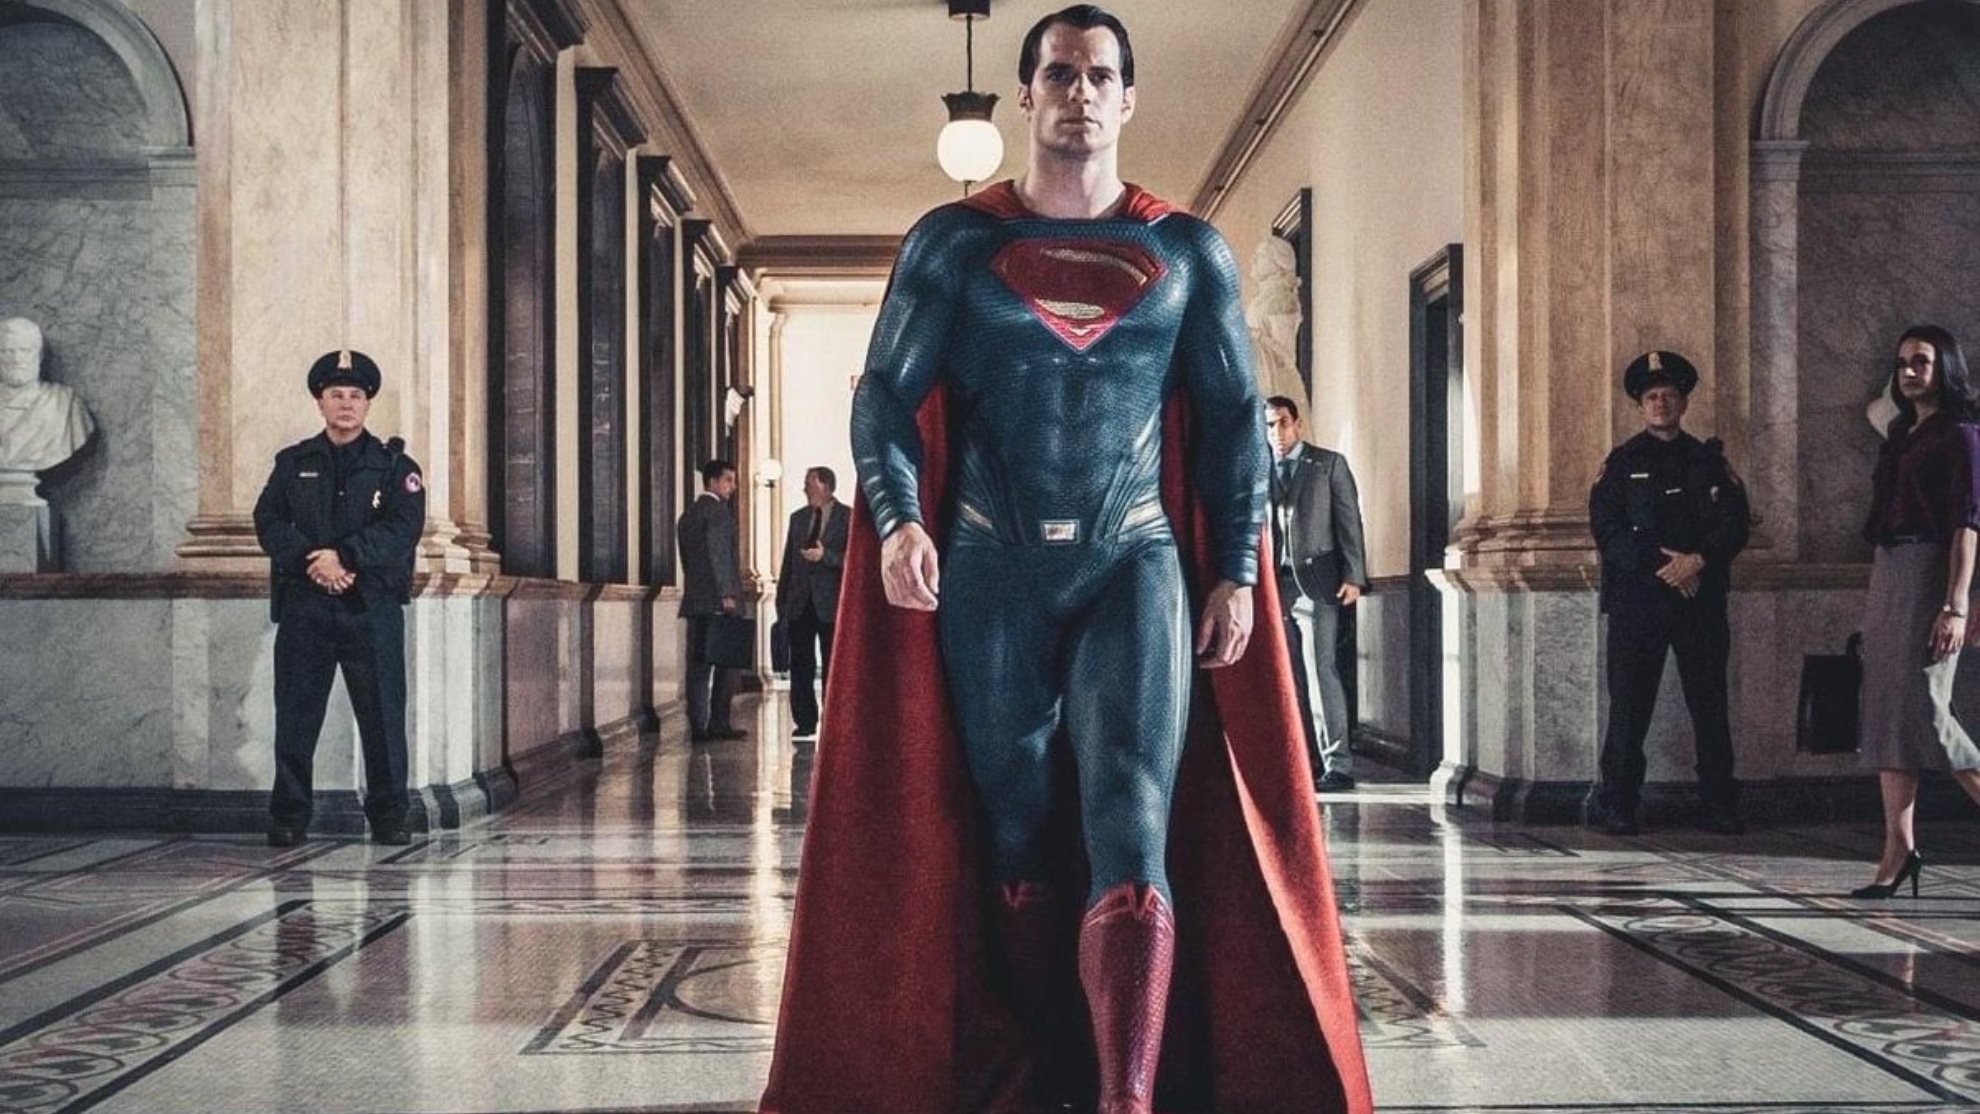 HBO Max gets in on the Cavill fun with Superman wordplay